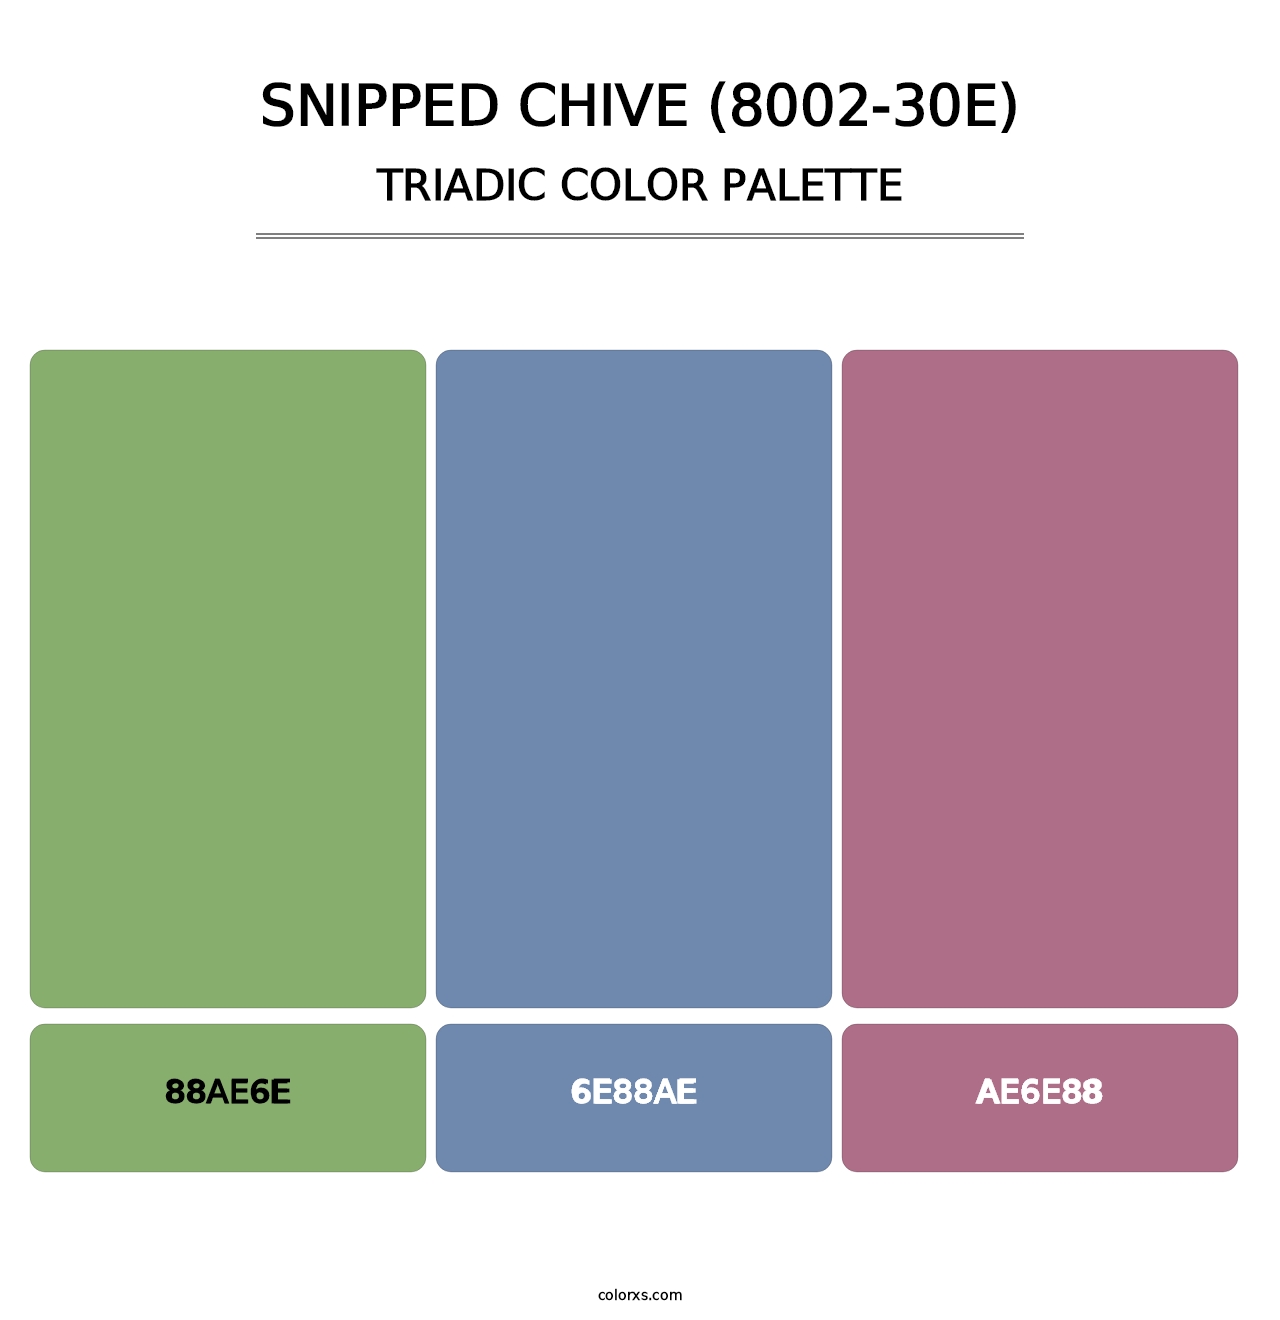 Snipped Chive (8002-30E) - Triadic Color Palette